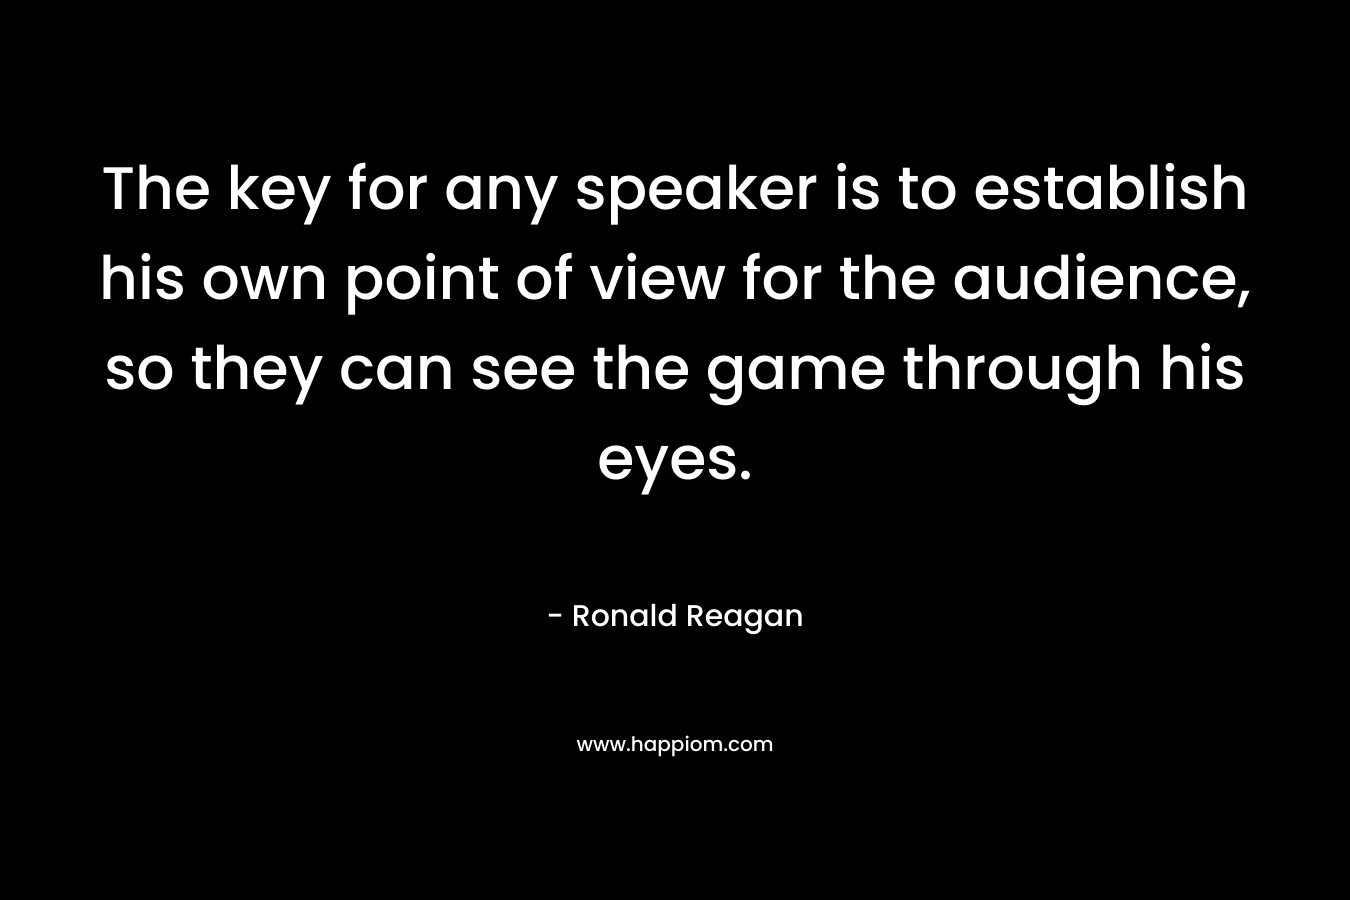 The key for any speaker is to establish his own point of view for the audience, so they can see the game through his eyes.